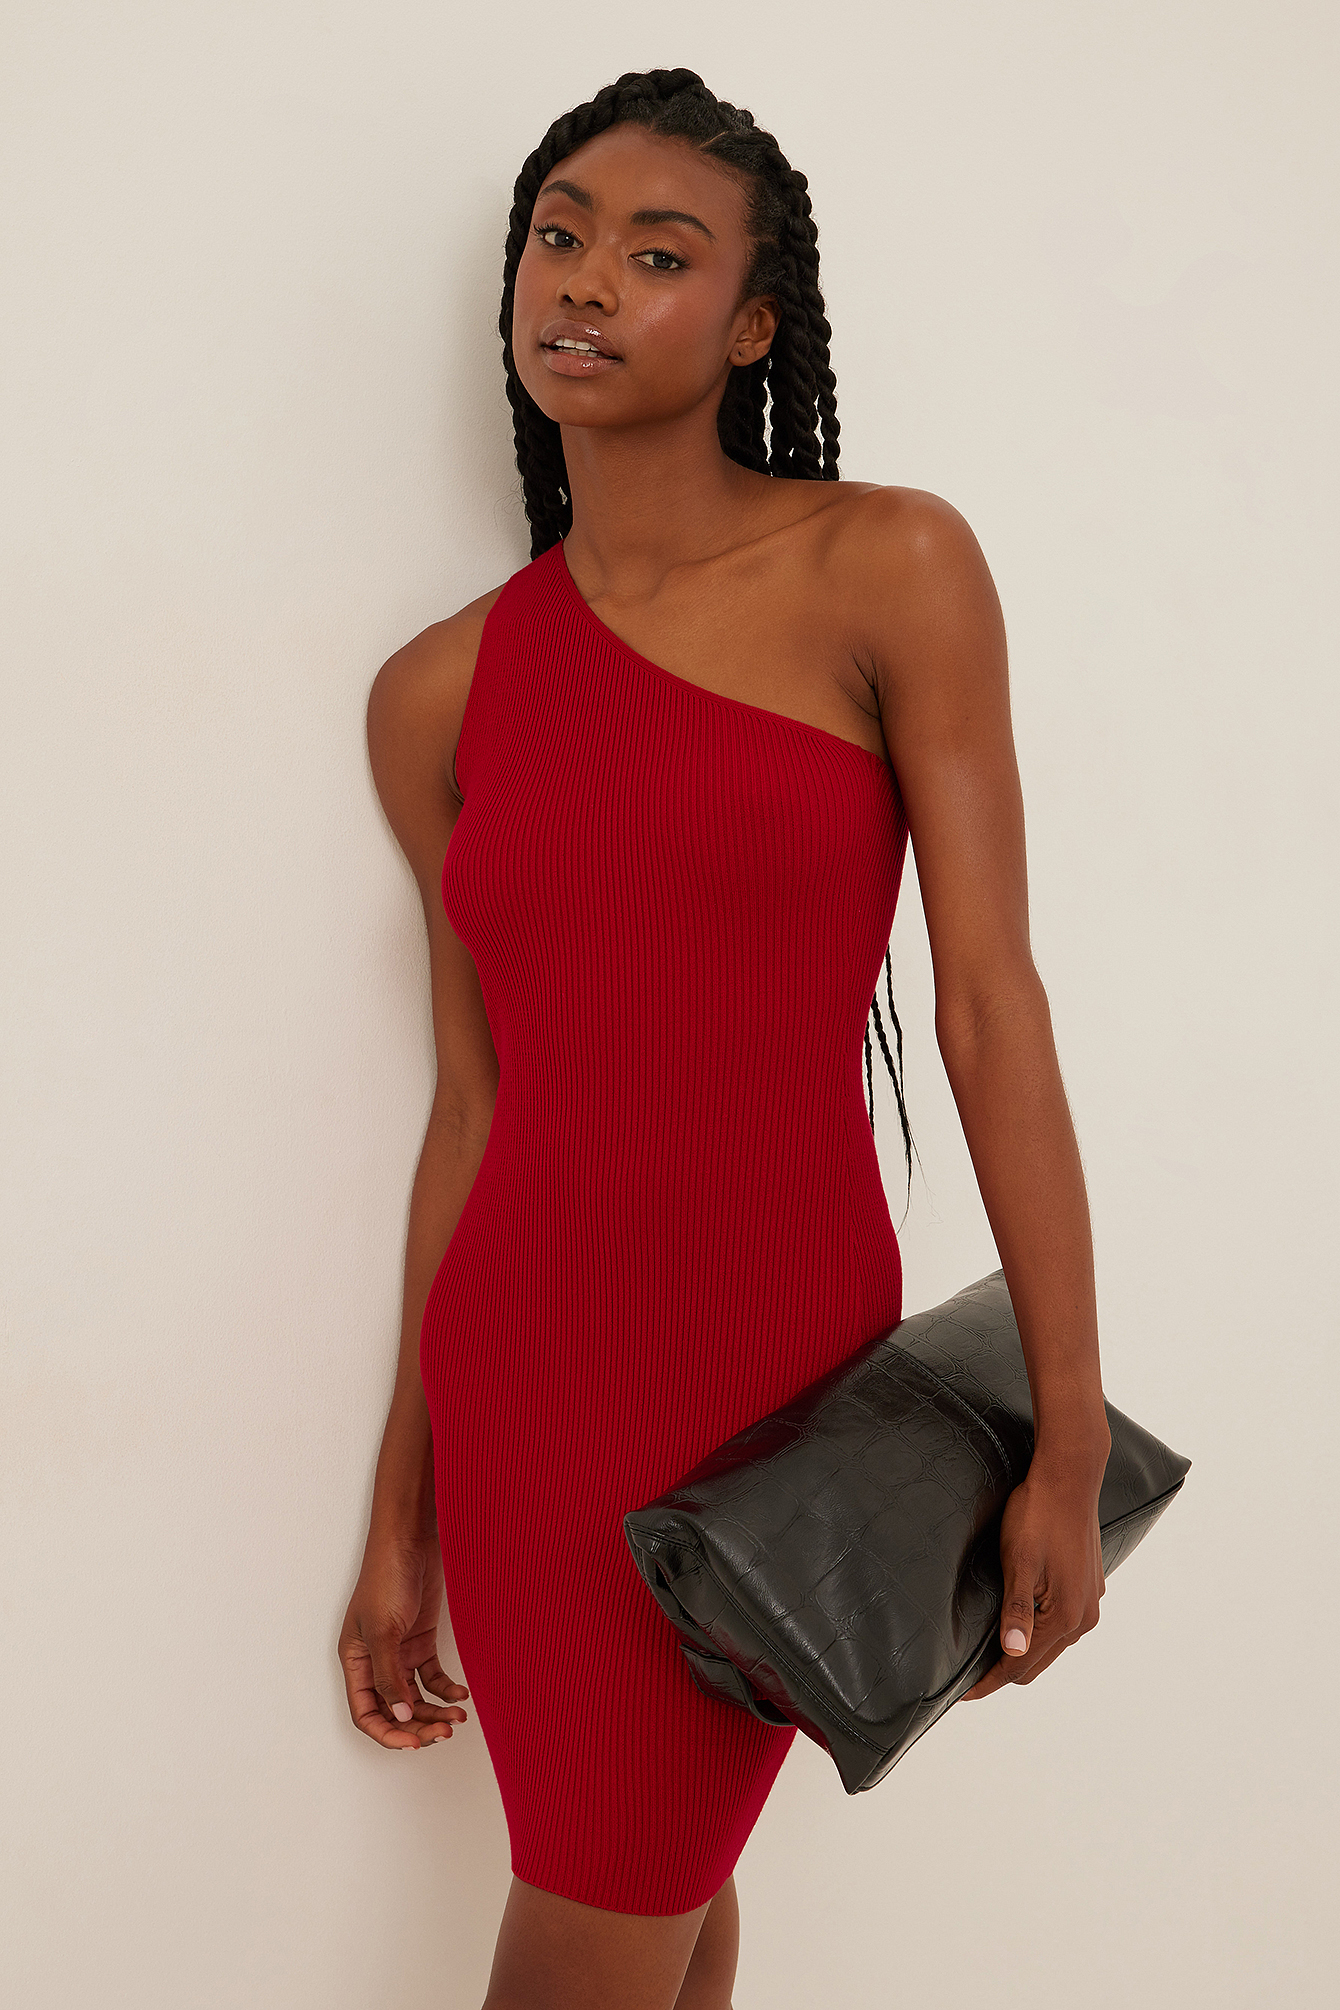 The Fabulous Red Bodycon Mini Dress -  Red bodycon mini dress, Mini dress,  Mini slip dress